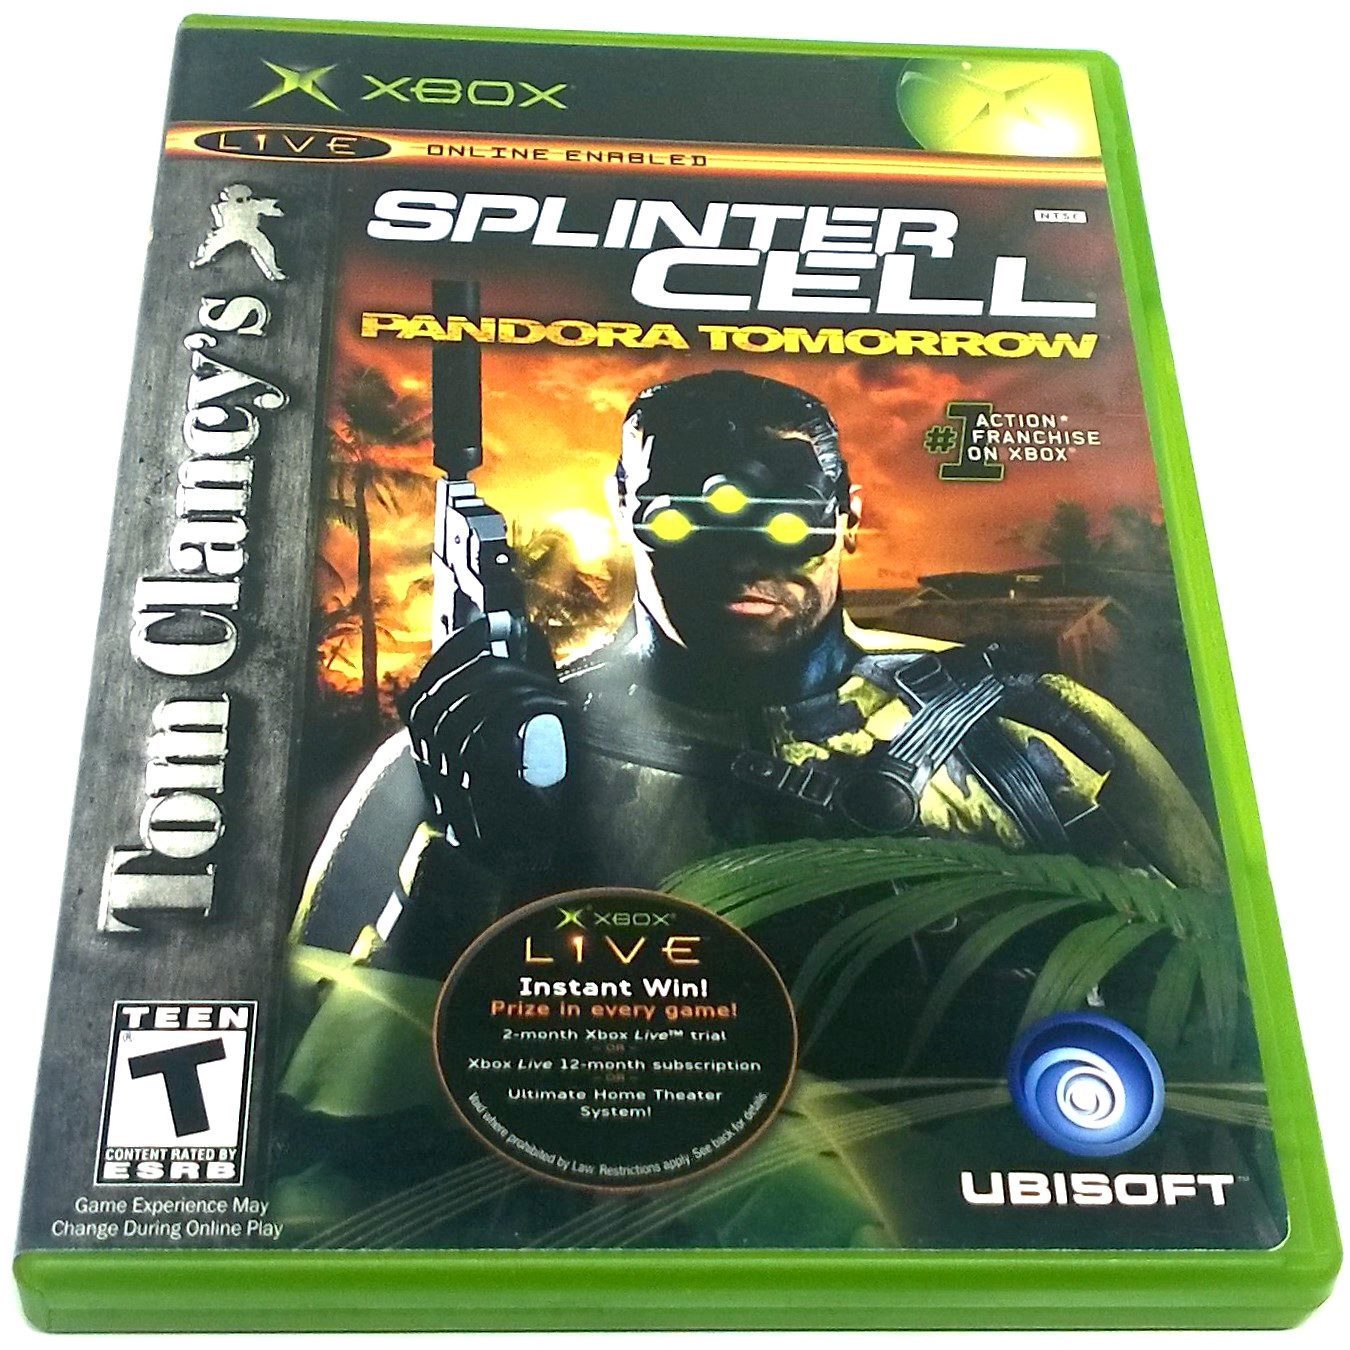 Tom Clancy's Splinter Cell: Pandora Tomorrow for Xbox - Front of case